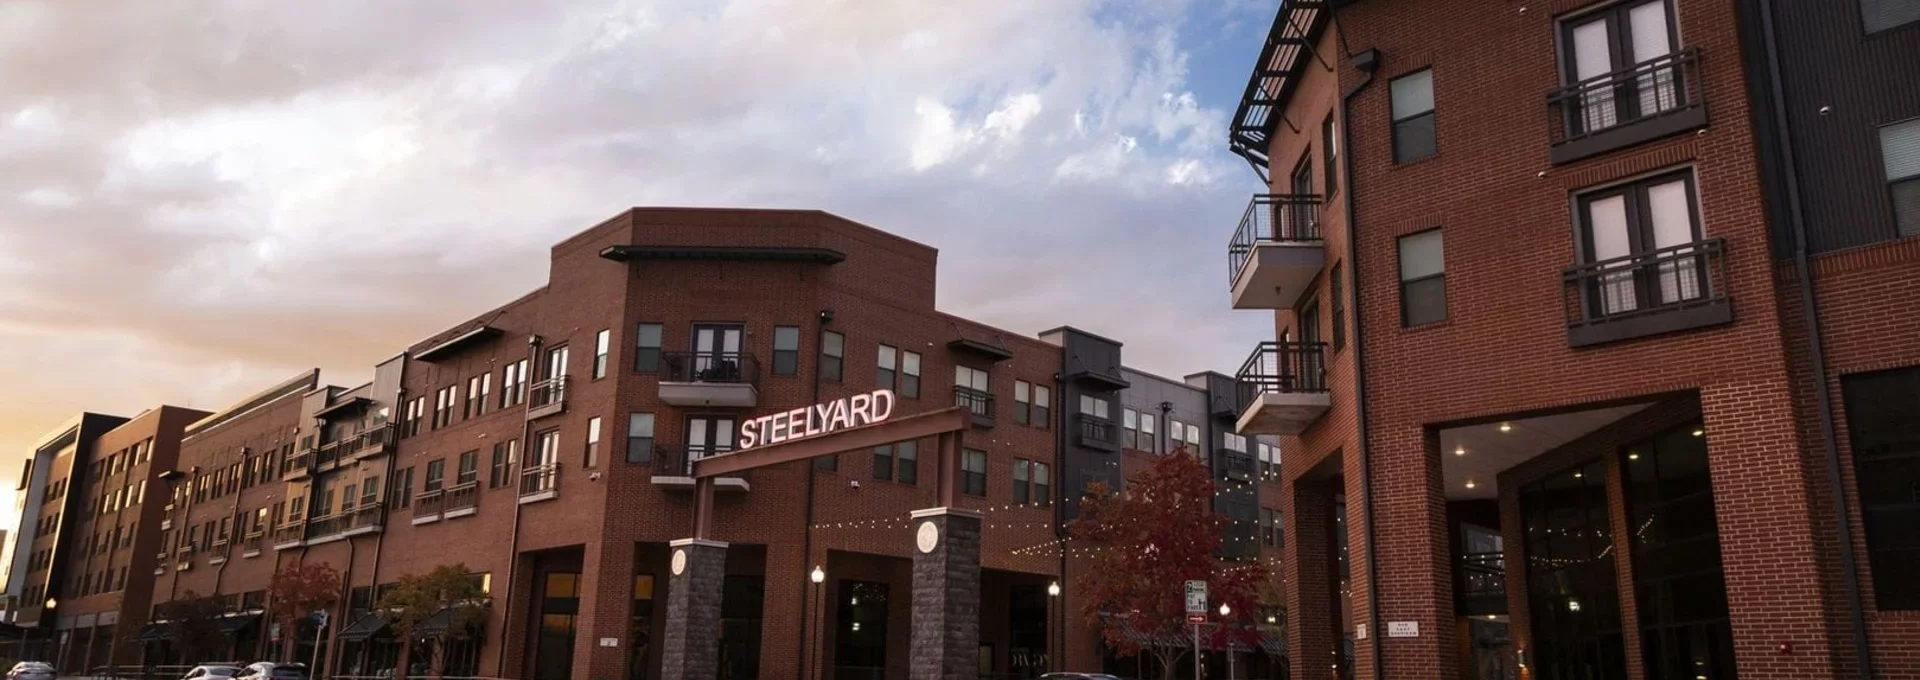 the building is made of brick and has a red brick facade at The Steelyard Apartments